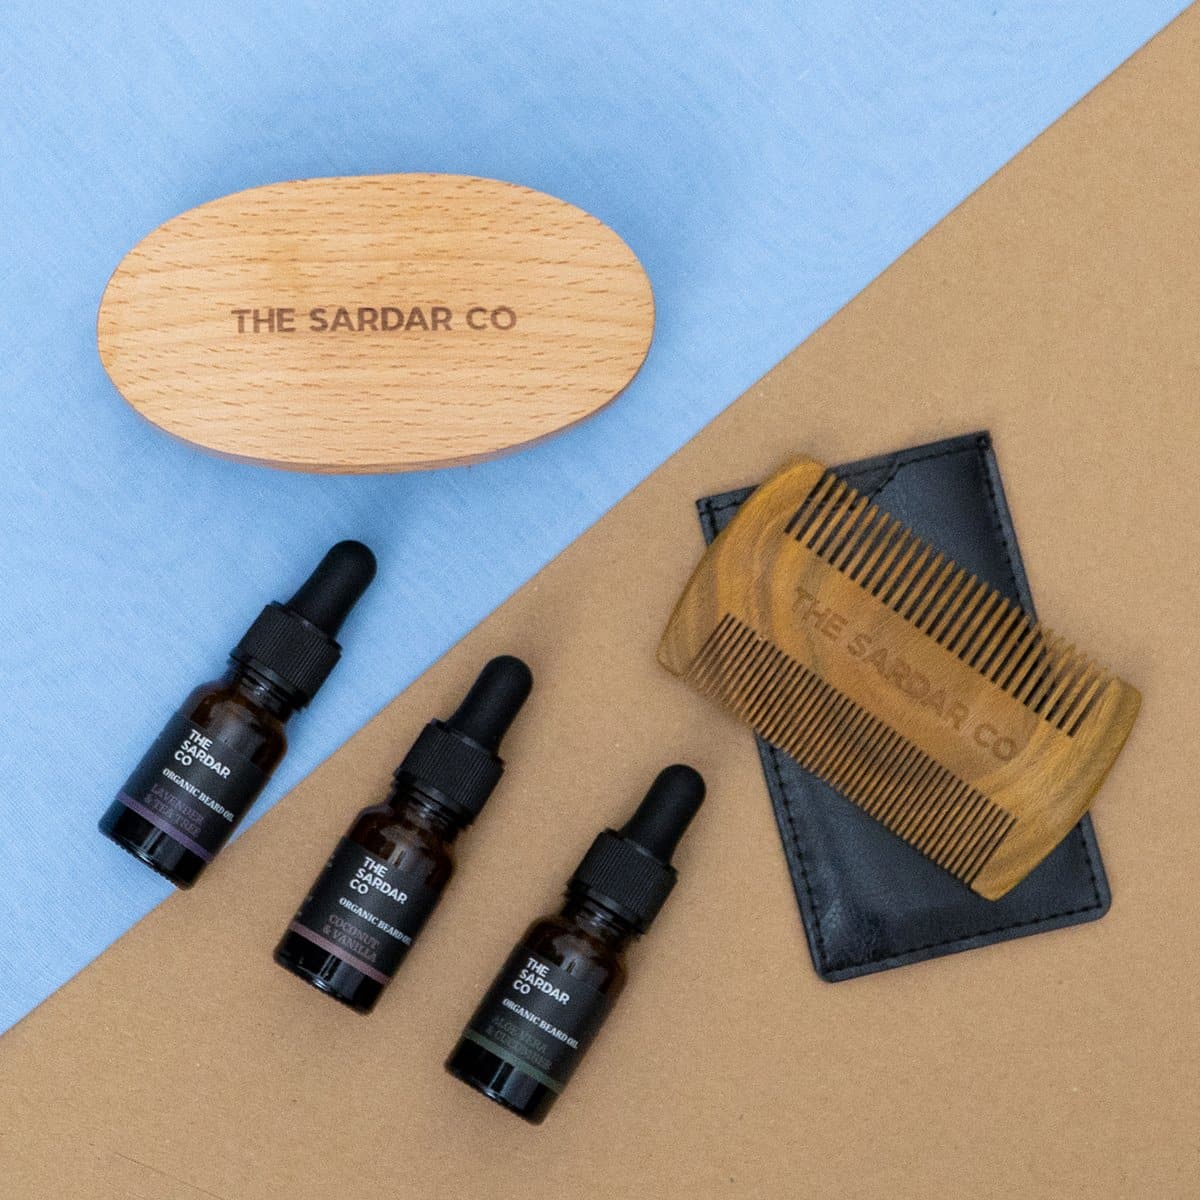 Father's Day Beard Care Gift Set - The Sardar Co